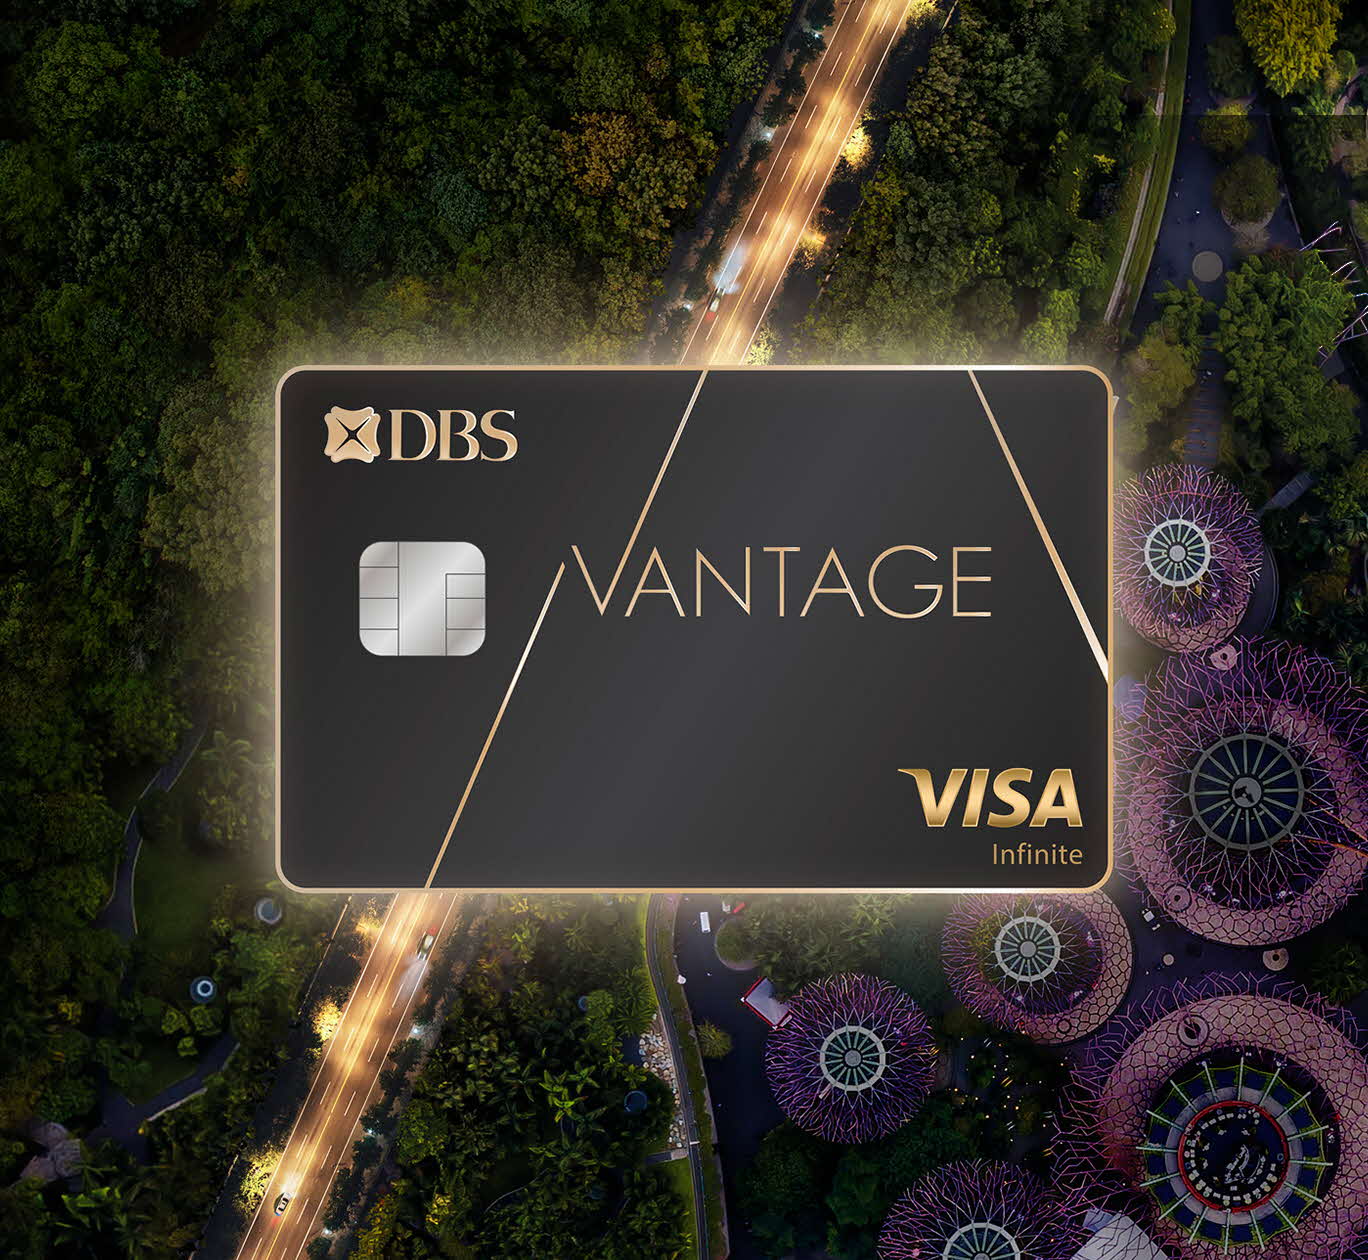 Enjoy up to 80,000 miles. Sign up for DBS Vantage Card from 10 May to 6 Jun 2023